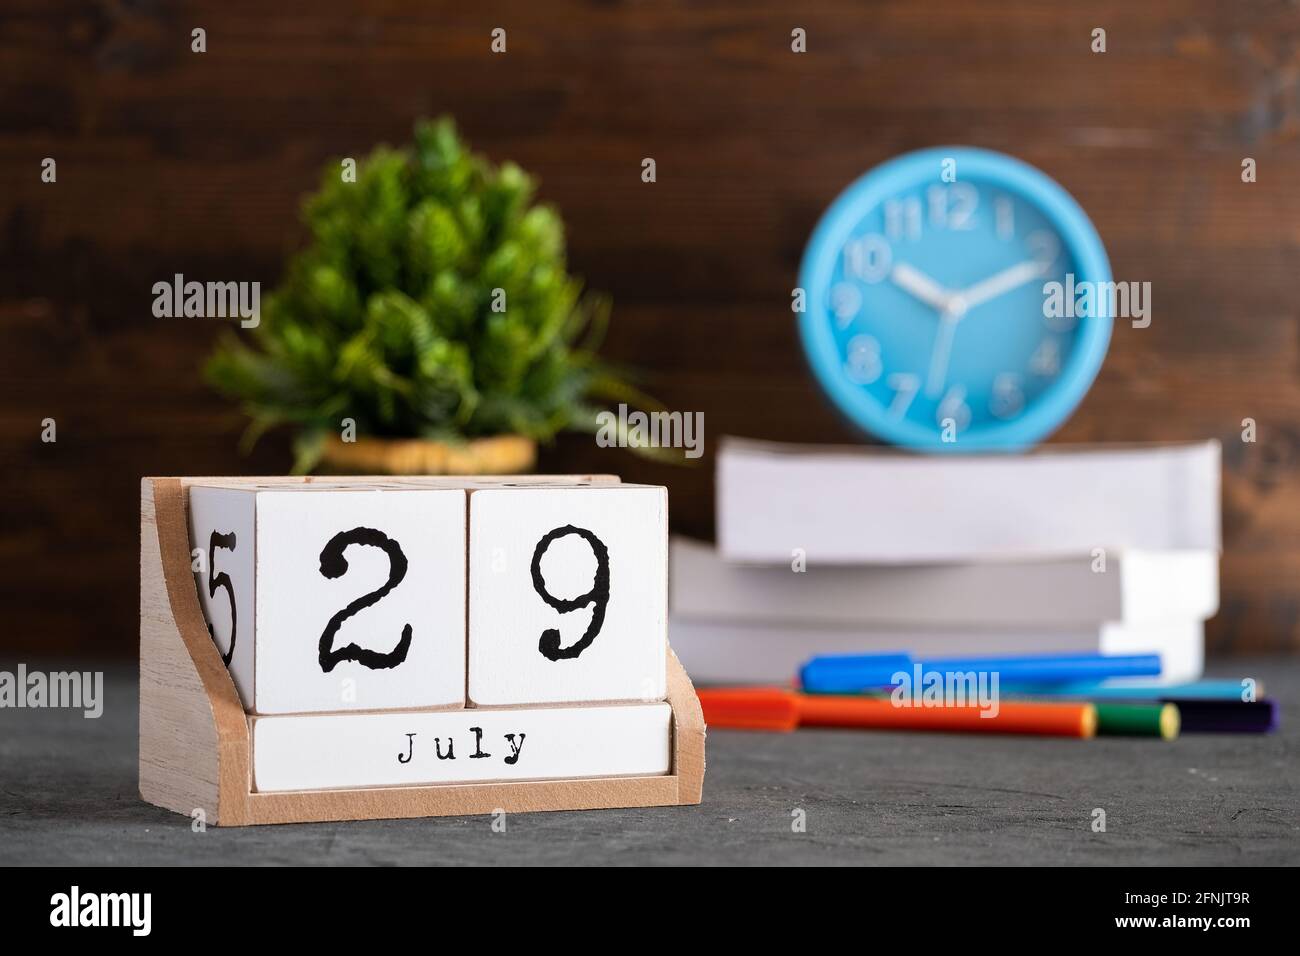 July 29th. July 29 wooden cube calendar with blur objects on background. Stock Photo